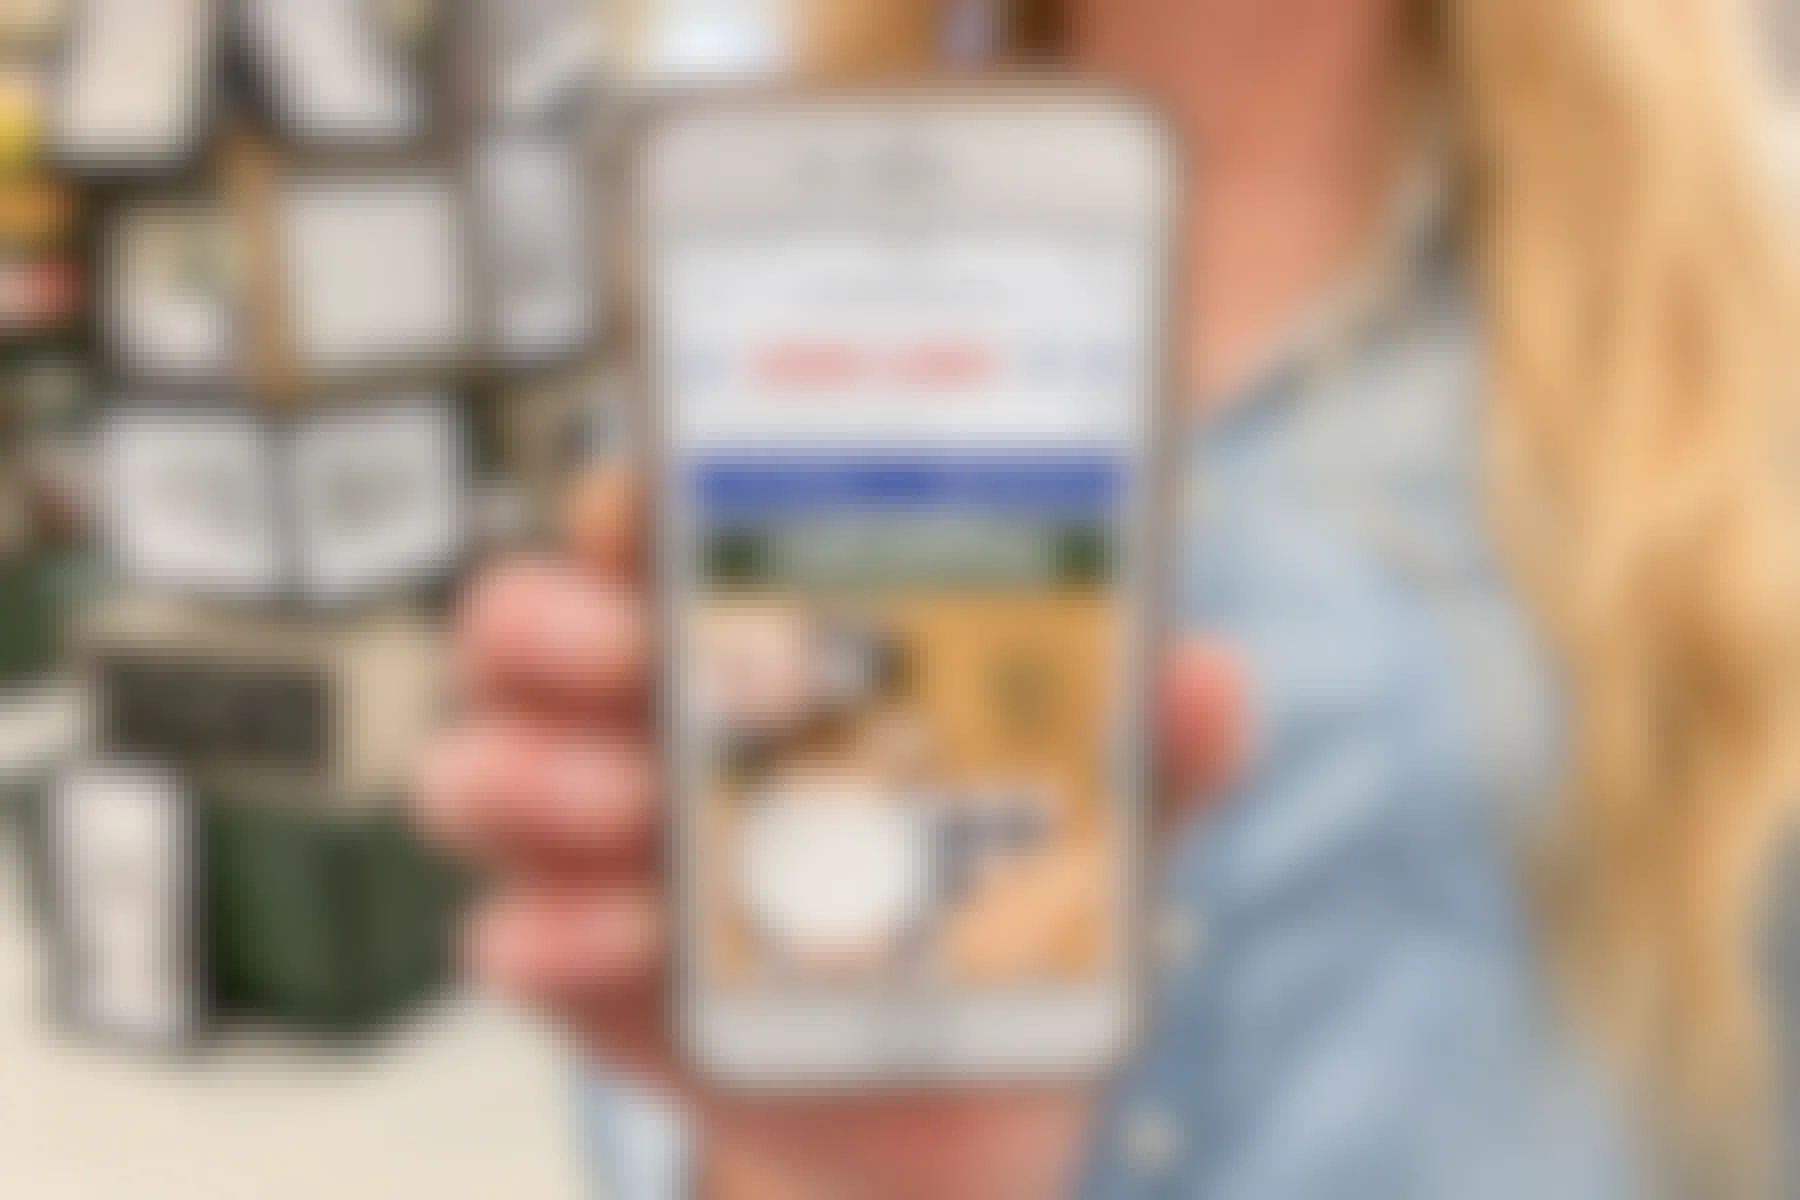 A cell phone screen showing Hobby Lobby's home page featuring a free shipping offer.